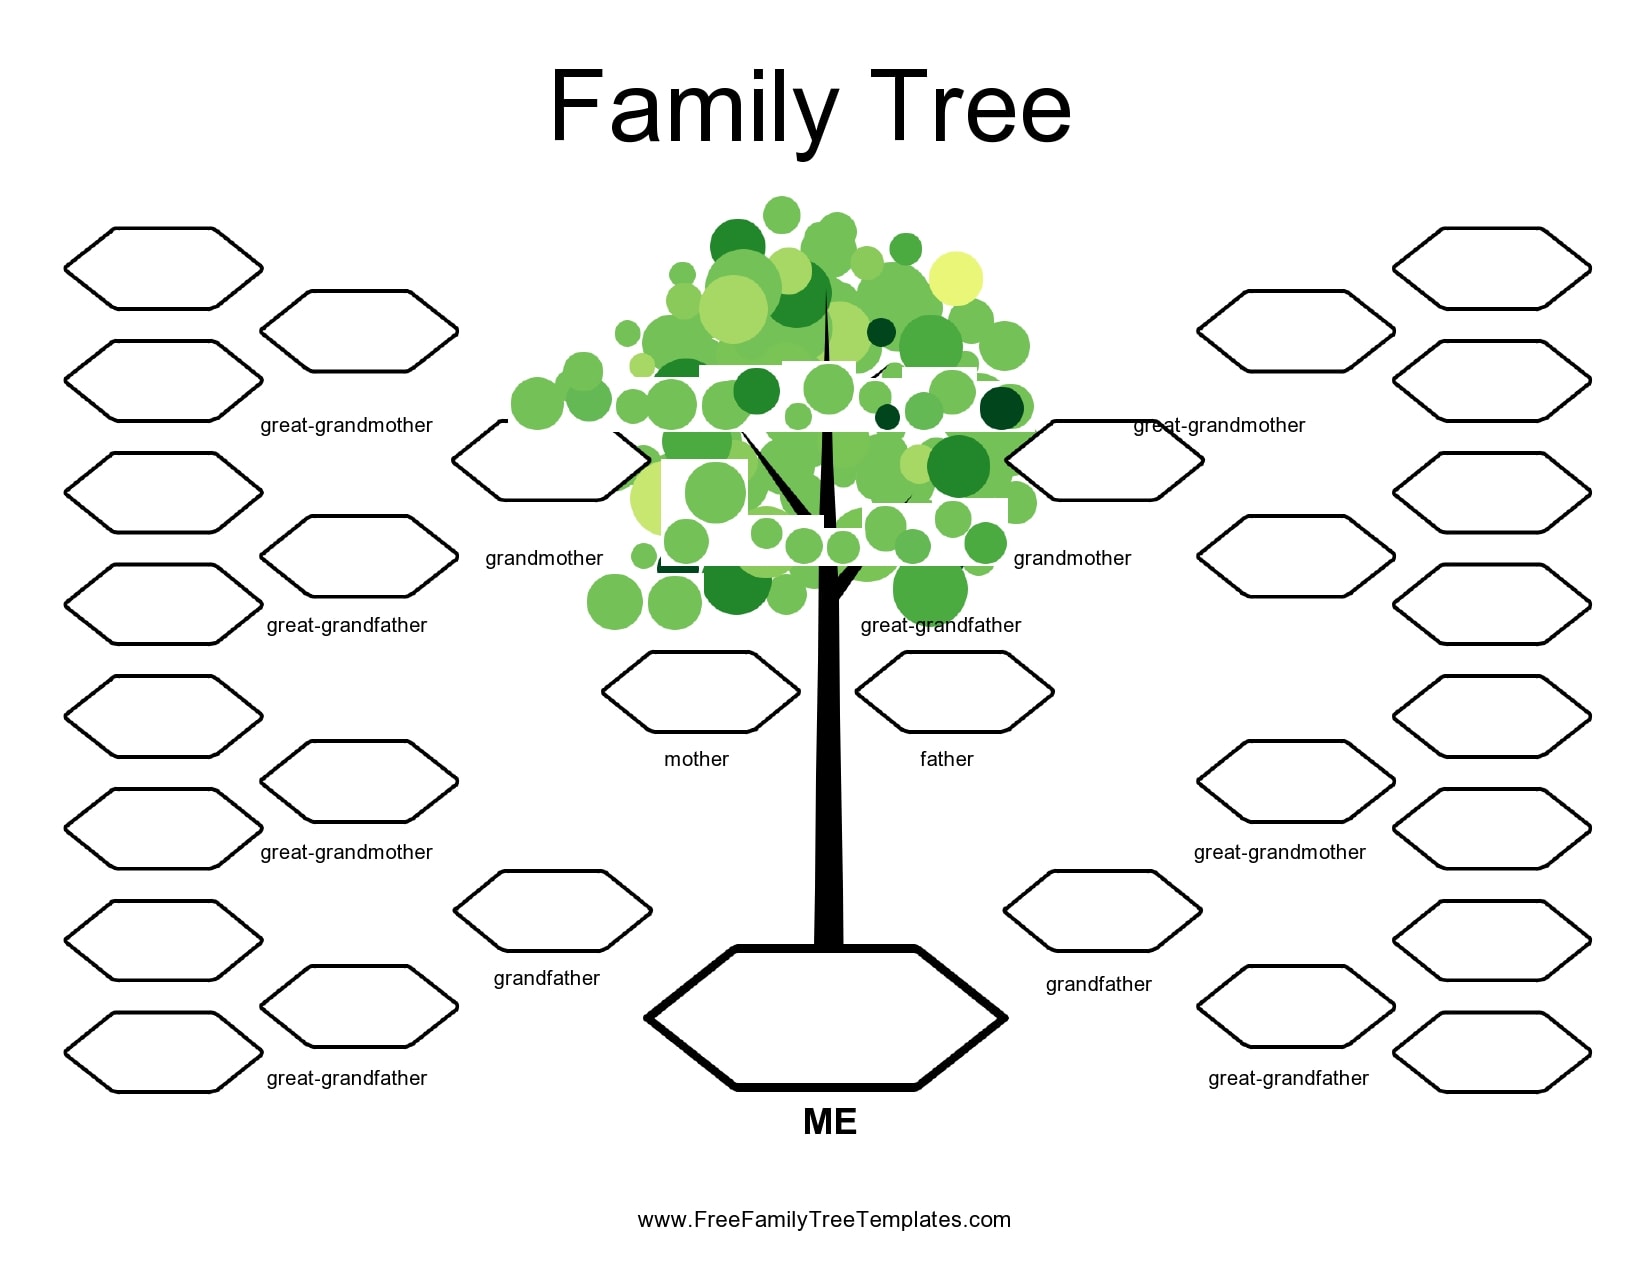 Blended Family Tree Template – Free Family Tree Templates